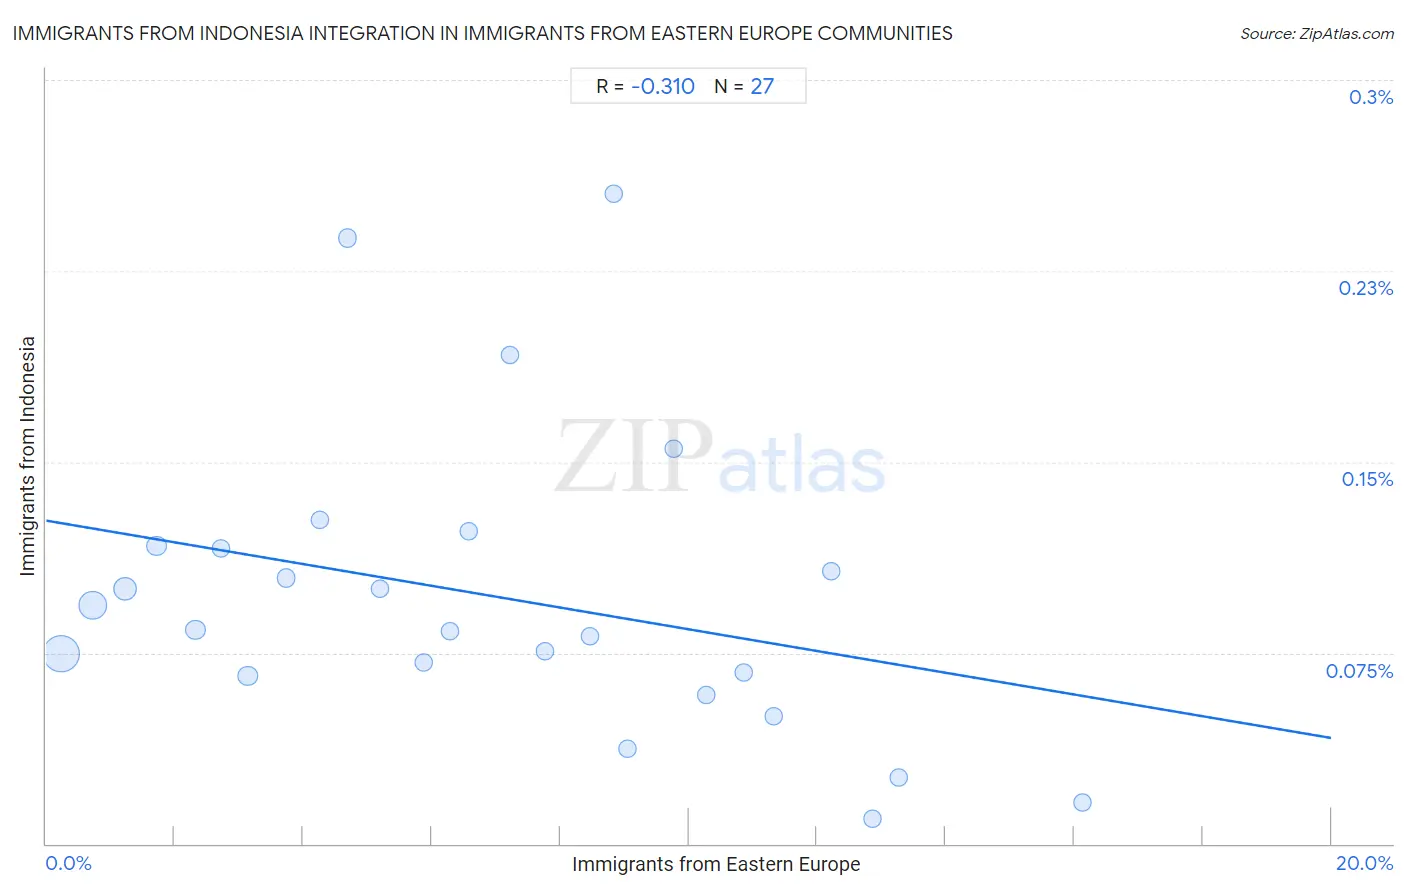 Immigrants from Eastern Europe Integration in Immigrants from Indonesia Communities